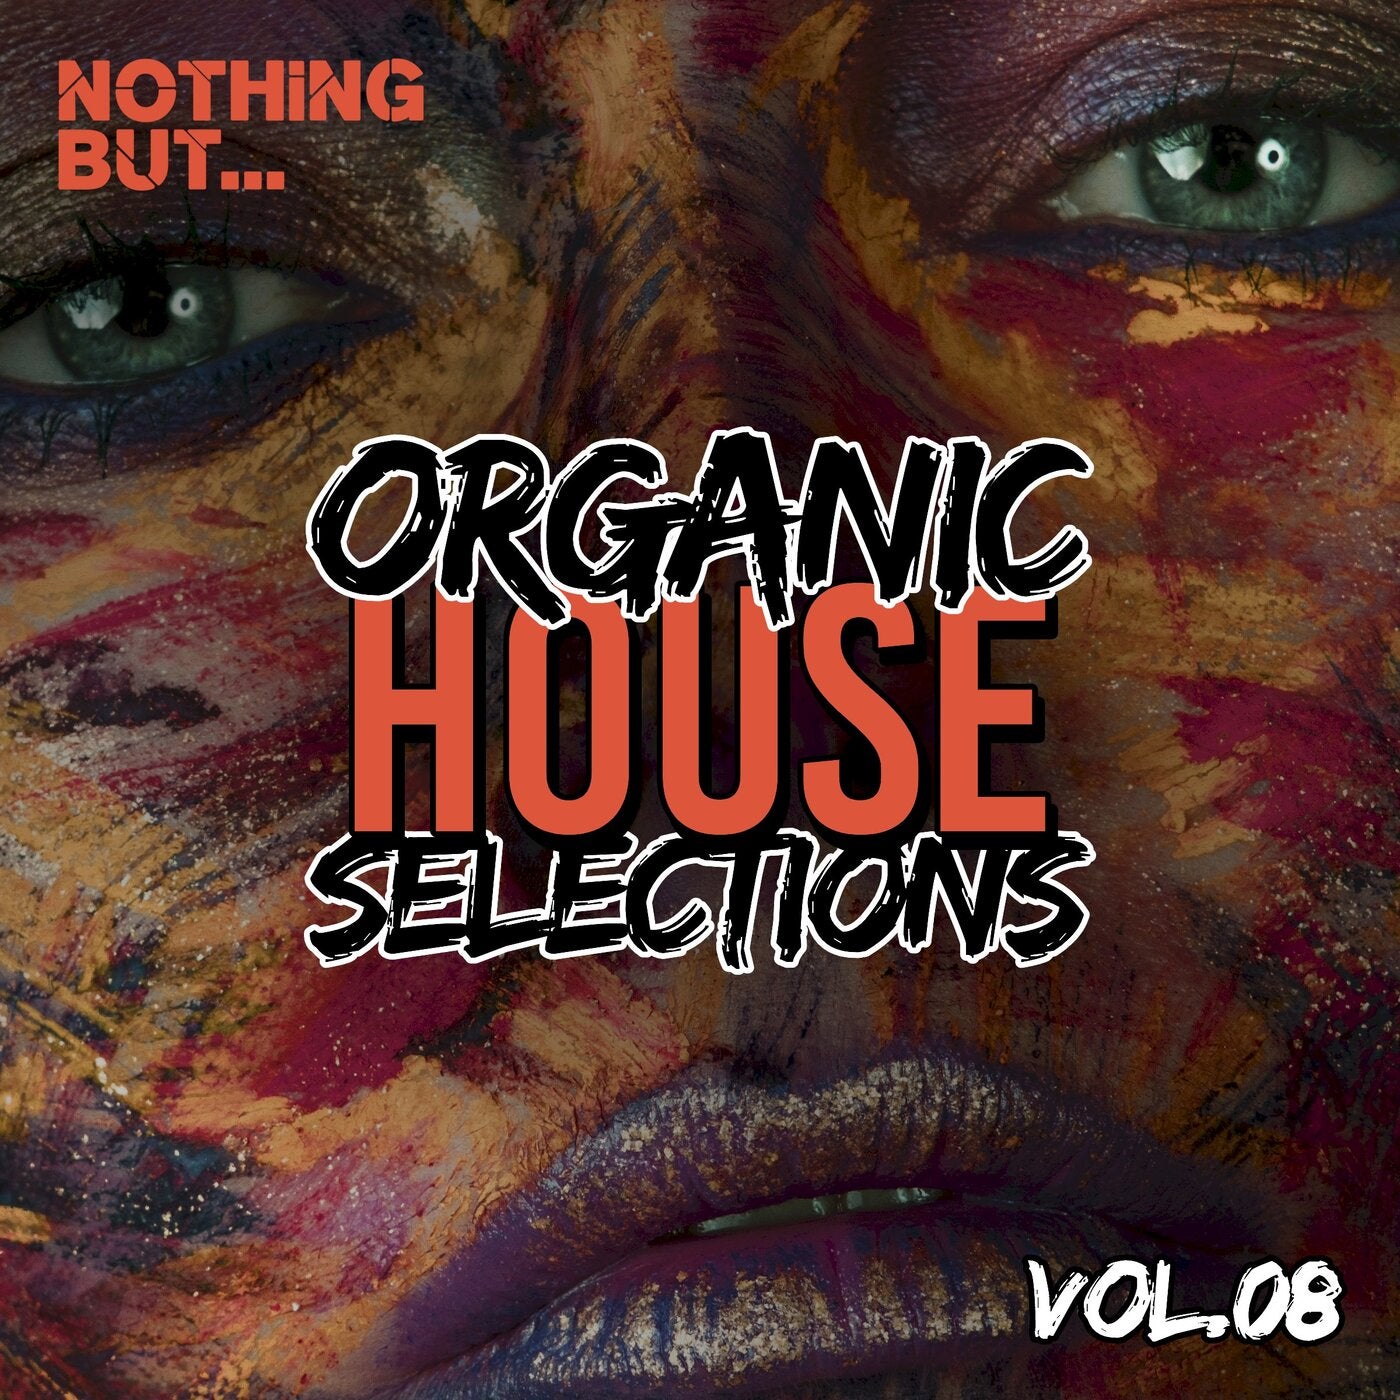 VA – Nothing But… Organic House Selections, Vol. 08 [NBOHS08]